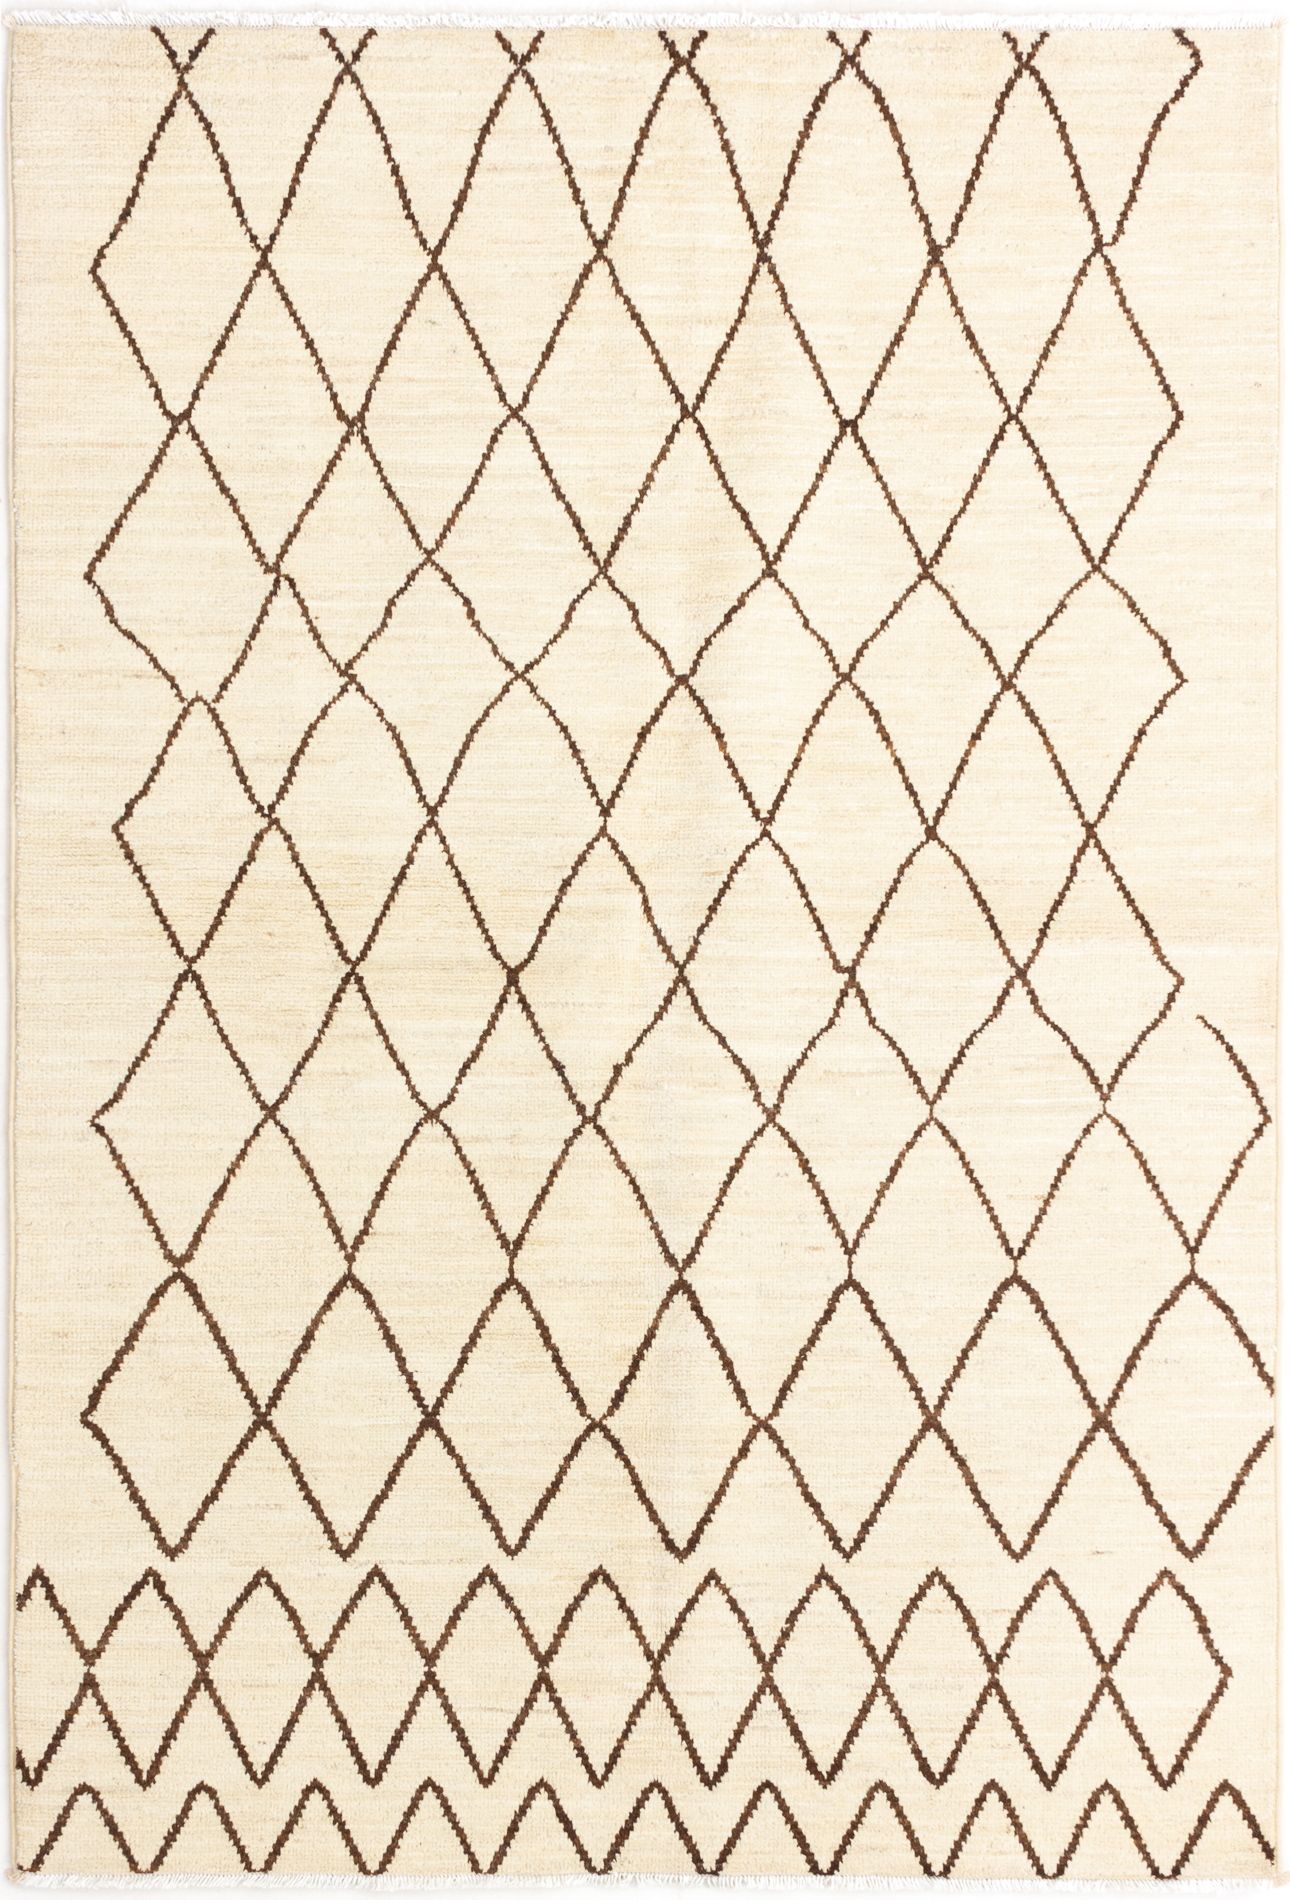 Hand-knotted Tangier Cream Wool Rug 6'0" x 8'9" Size: 6'0" x 8'9"  